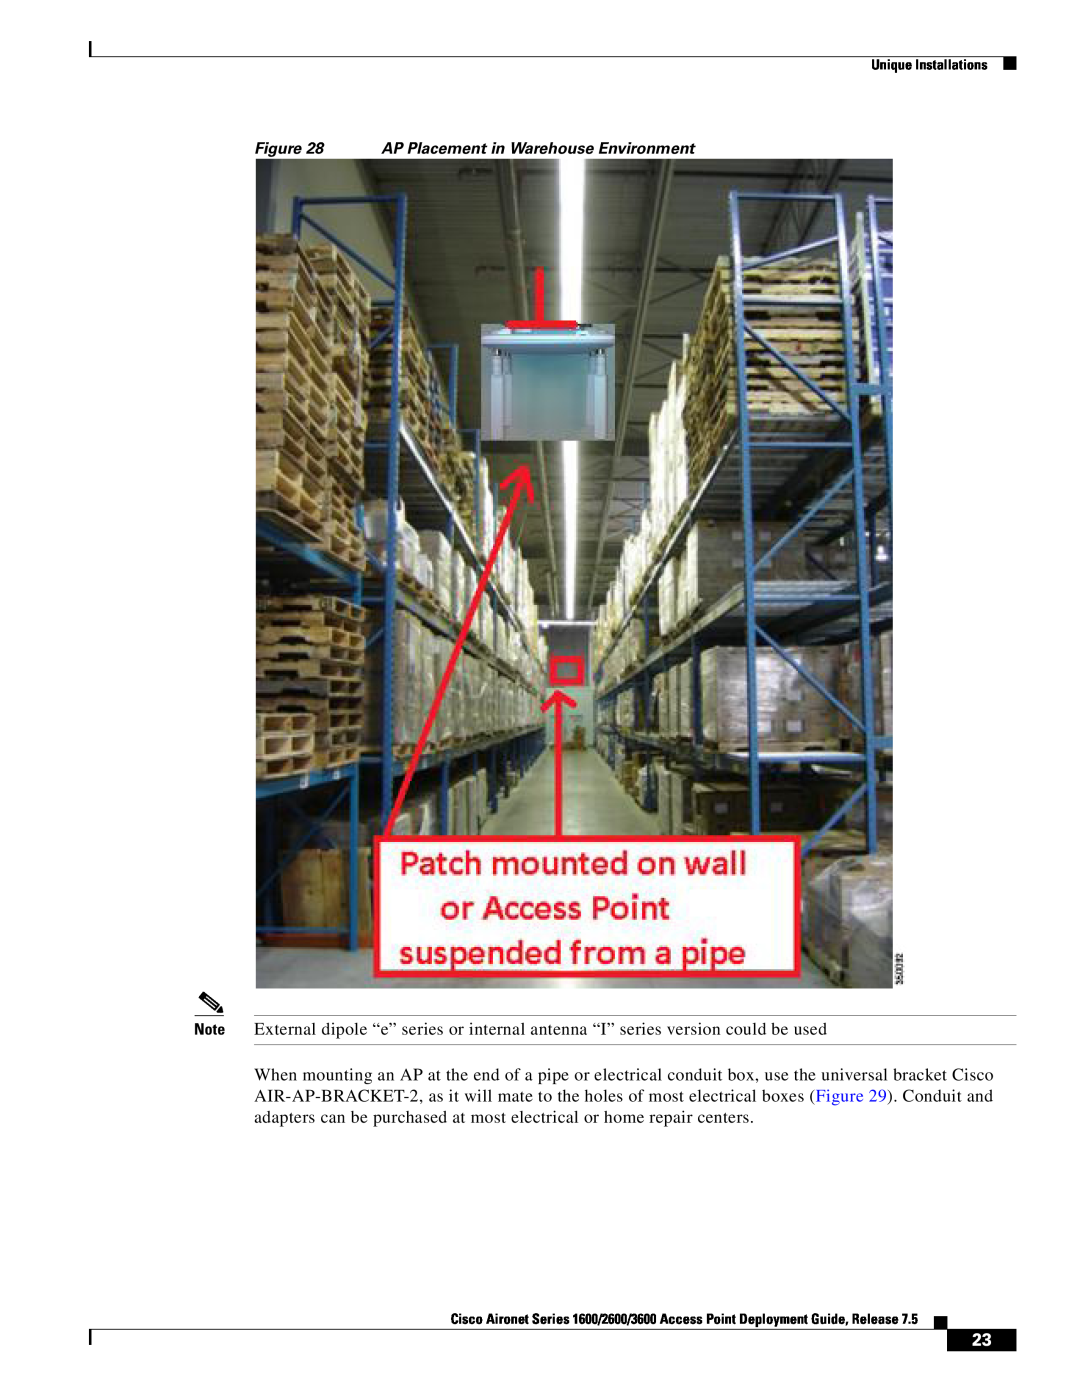 Cisco Systems AIRRM3000ACAK9 manual AP Placement in Warehouse Environment 